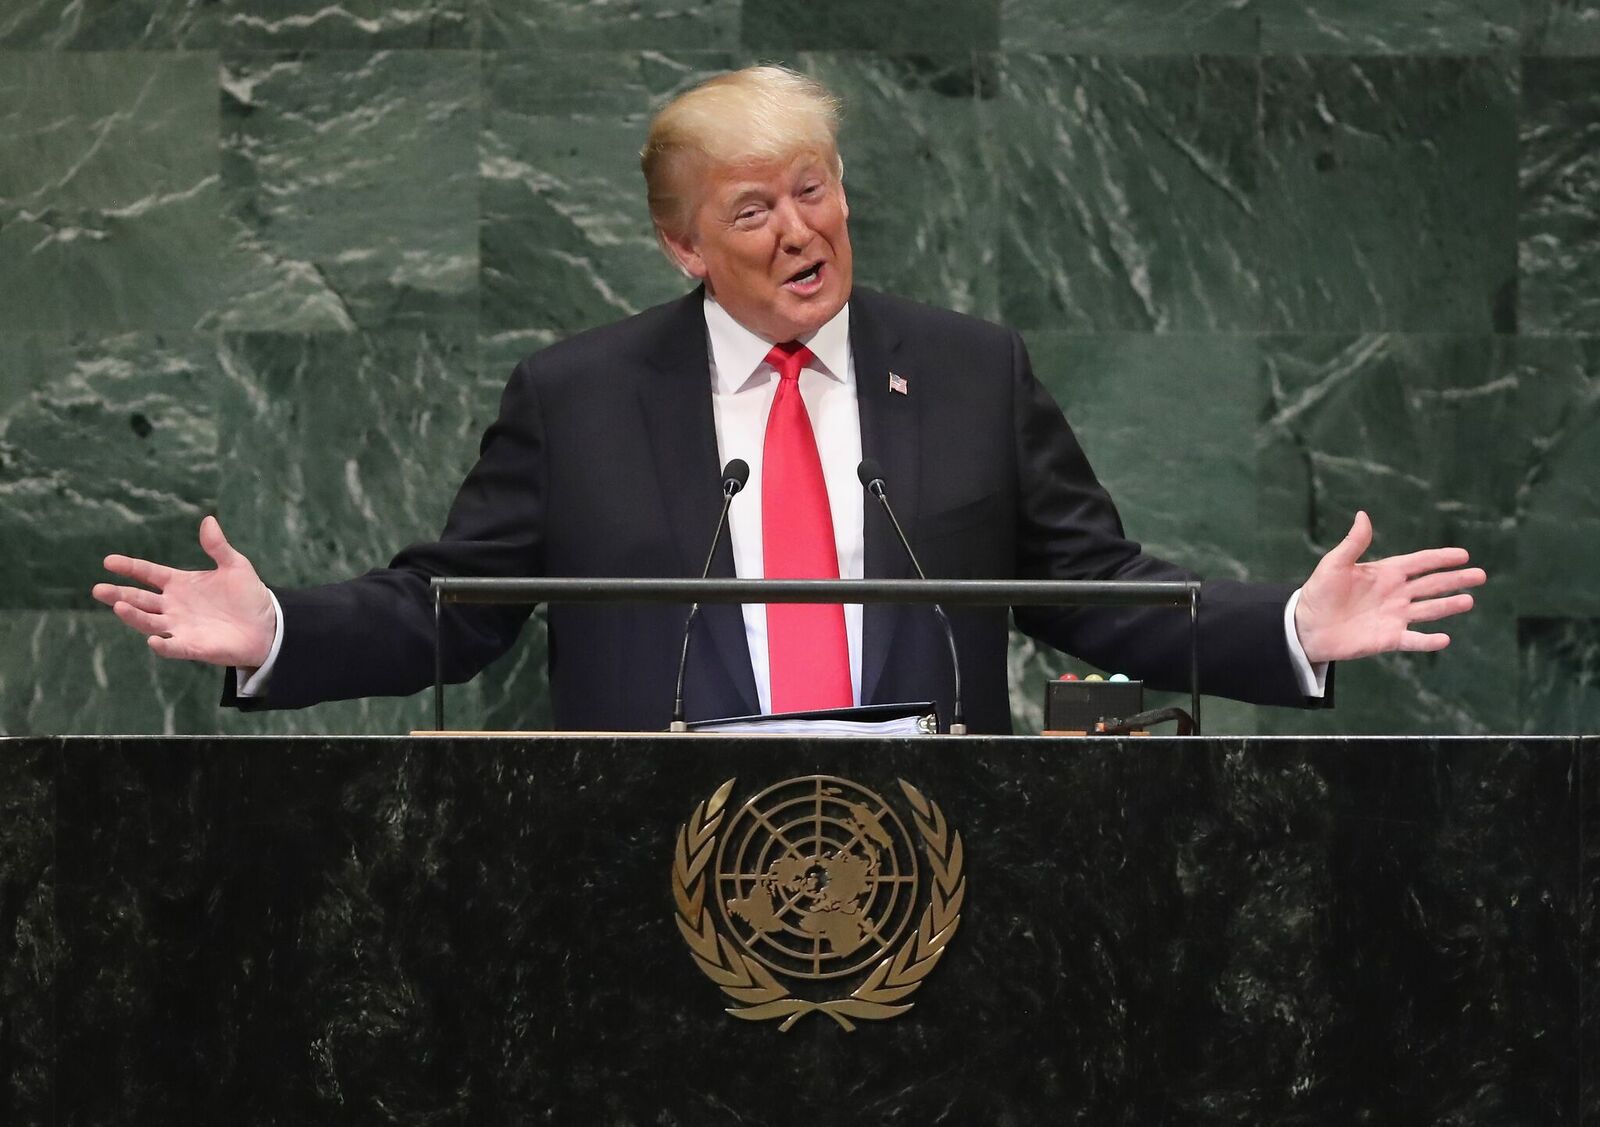 President Donald Trump at the 73rd session of the United Nations General Assembly on September 25, 2018, in New York City | Photo: John Moore/Getty Images